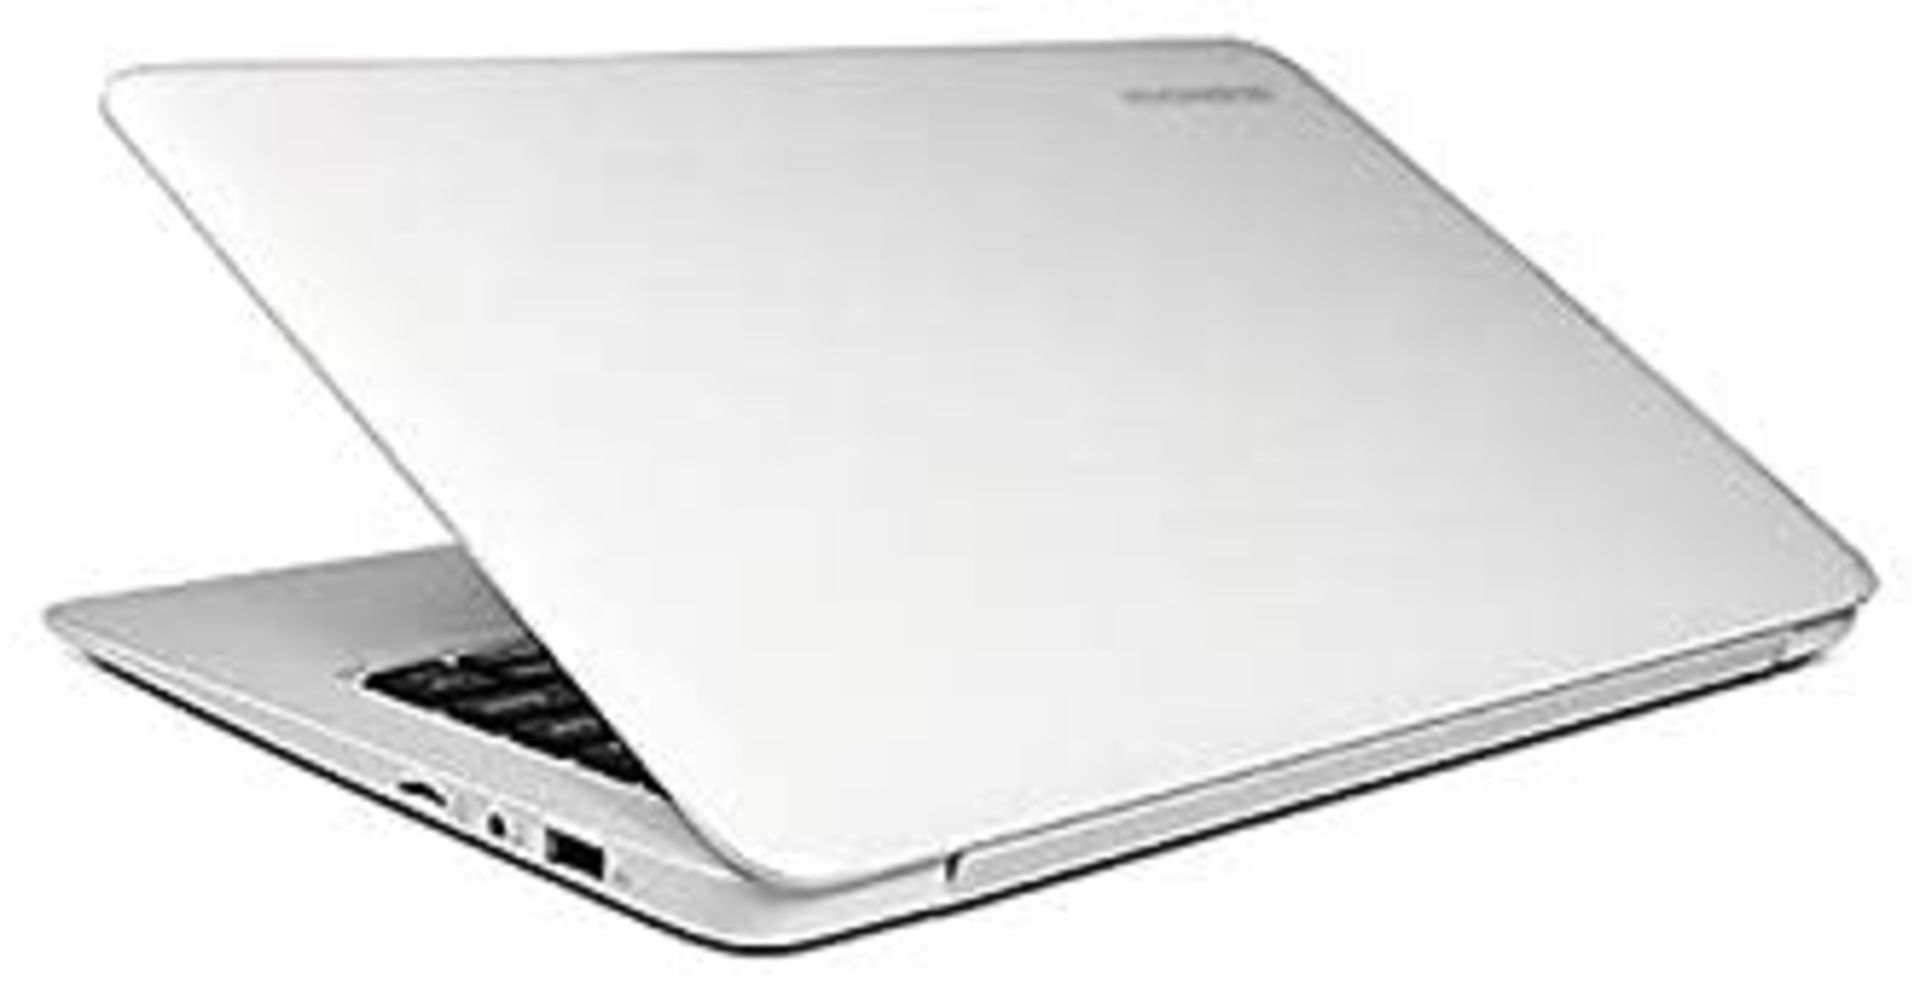 (T13) 1 x GRADE B - THOMSON UK-NEO10A-2WH32 10.1 Inch Laptop with Intel Atom 1.44GHz, 2GB RAM, ... - Image 2 of 3